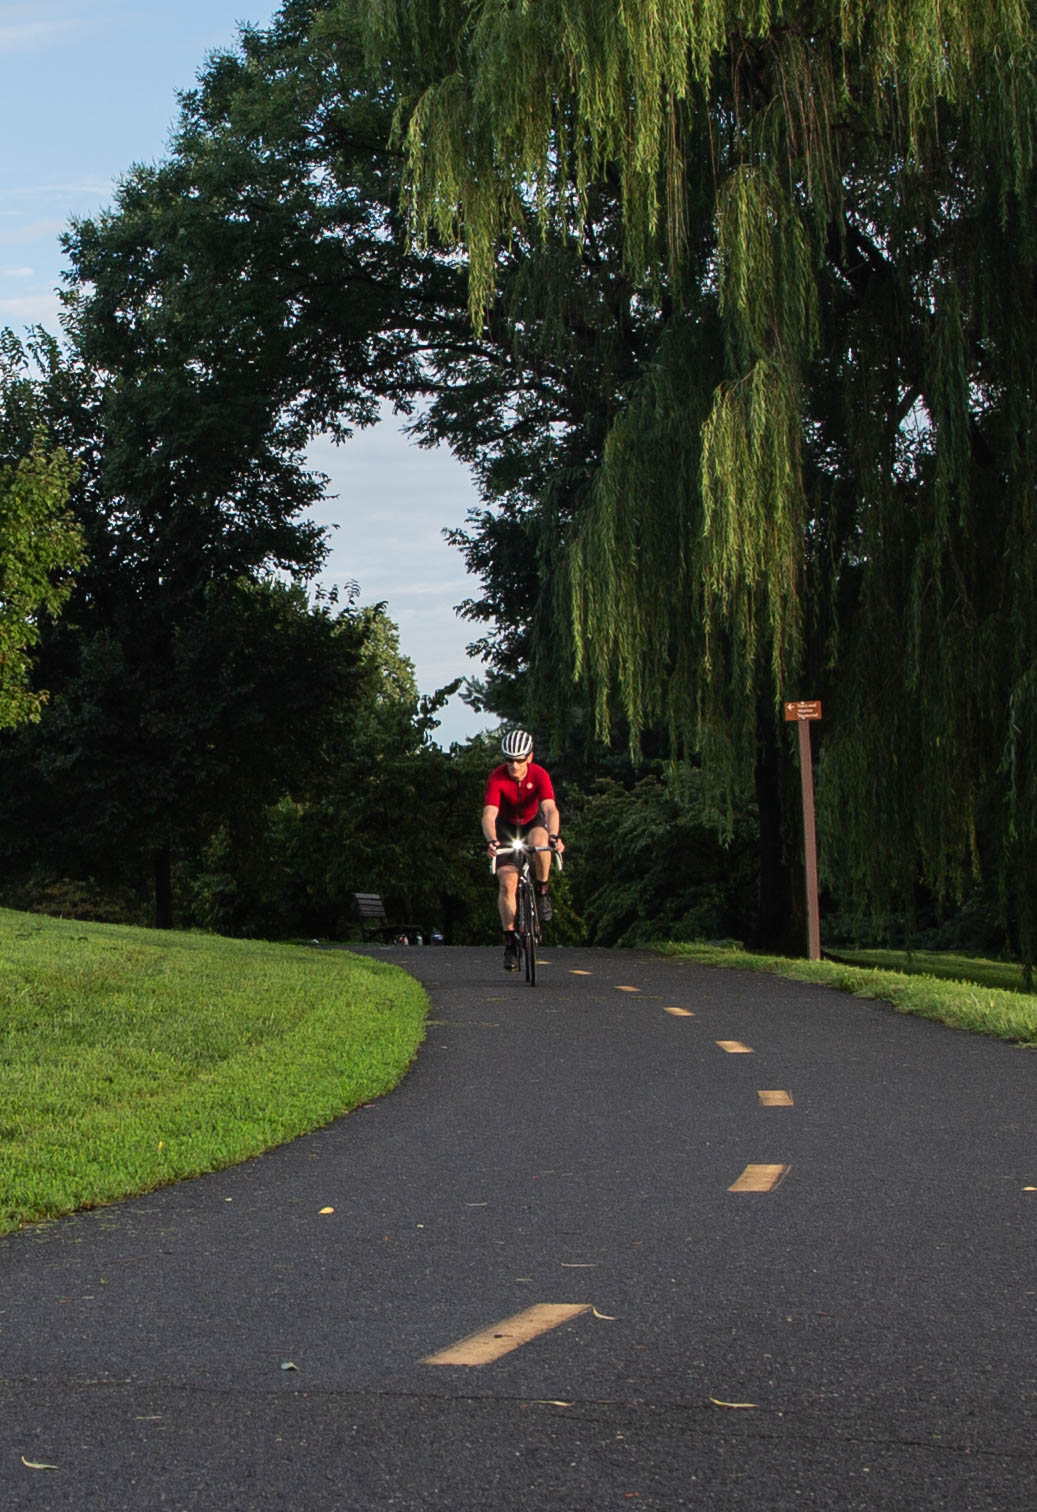 Bicyclist on a paved trail